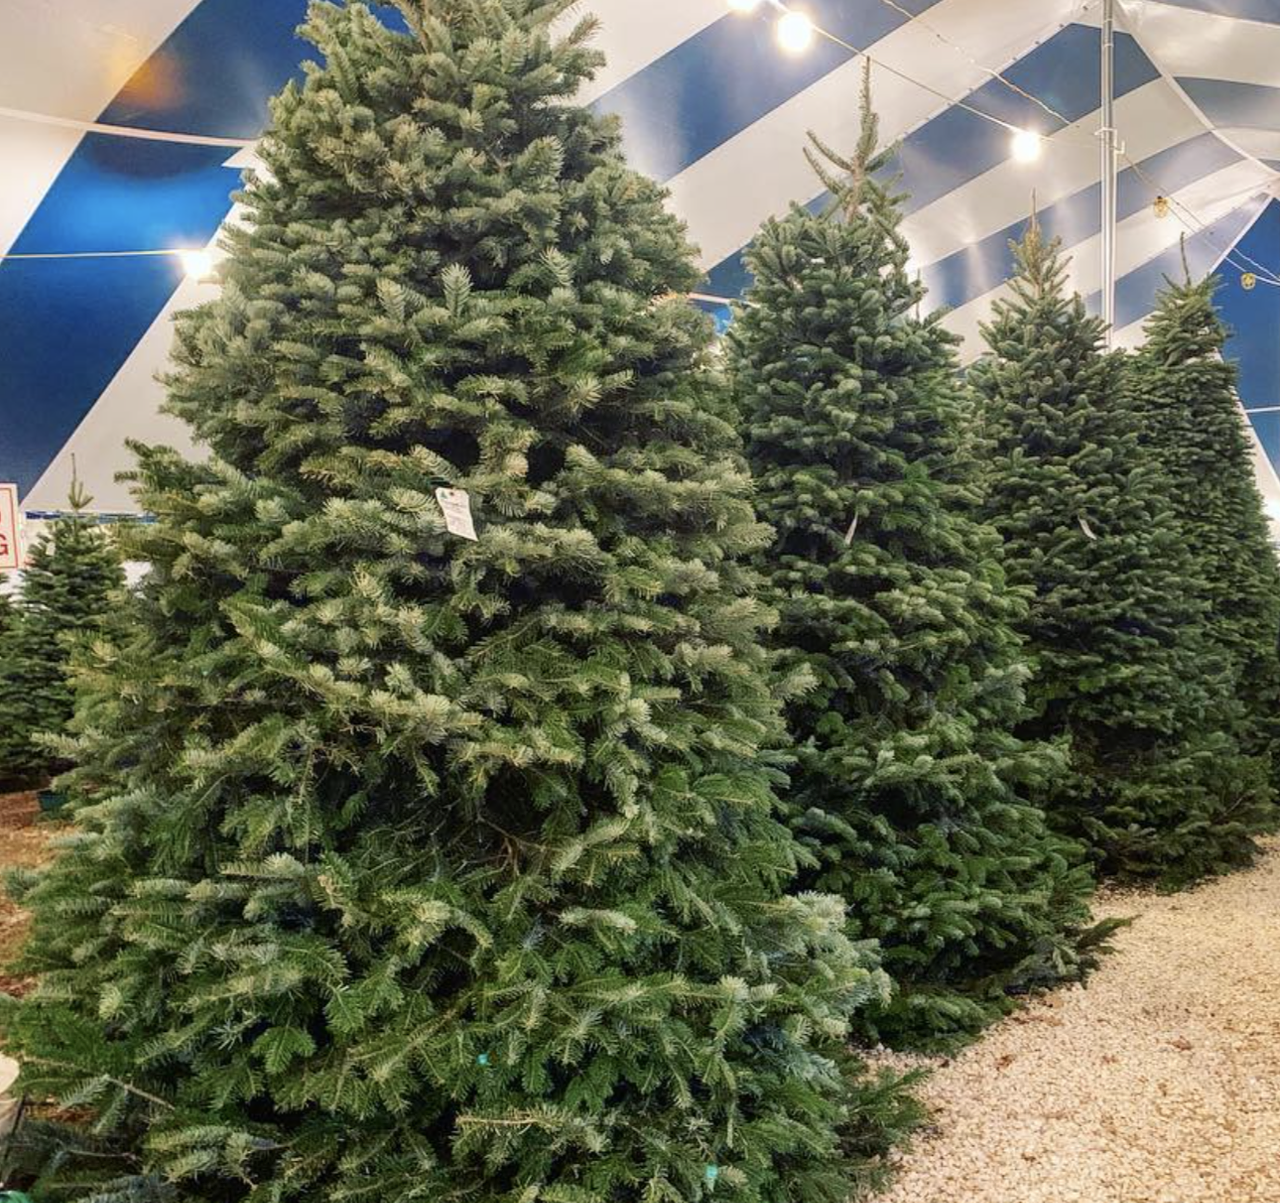 Holiday HillsChristmas Trees
Multiple locations, holidayhillschristmastrees.com/san-antonio
Holiday HIlls brings gorgeous Oregon-grown Christmas trees all the way down to SA for us to enjoy. Their selection includes Douglas, Noble, Grand, Nordmann and Fraser Fir trees, as well as the option to have trees delivered.
Photo via Instagram / papanoeltrees